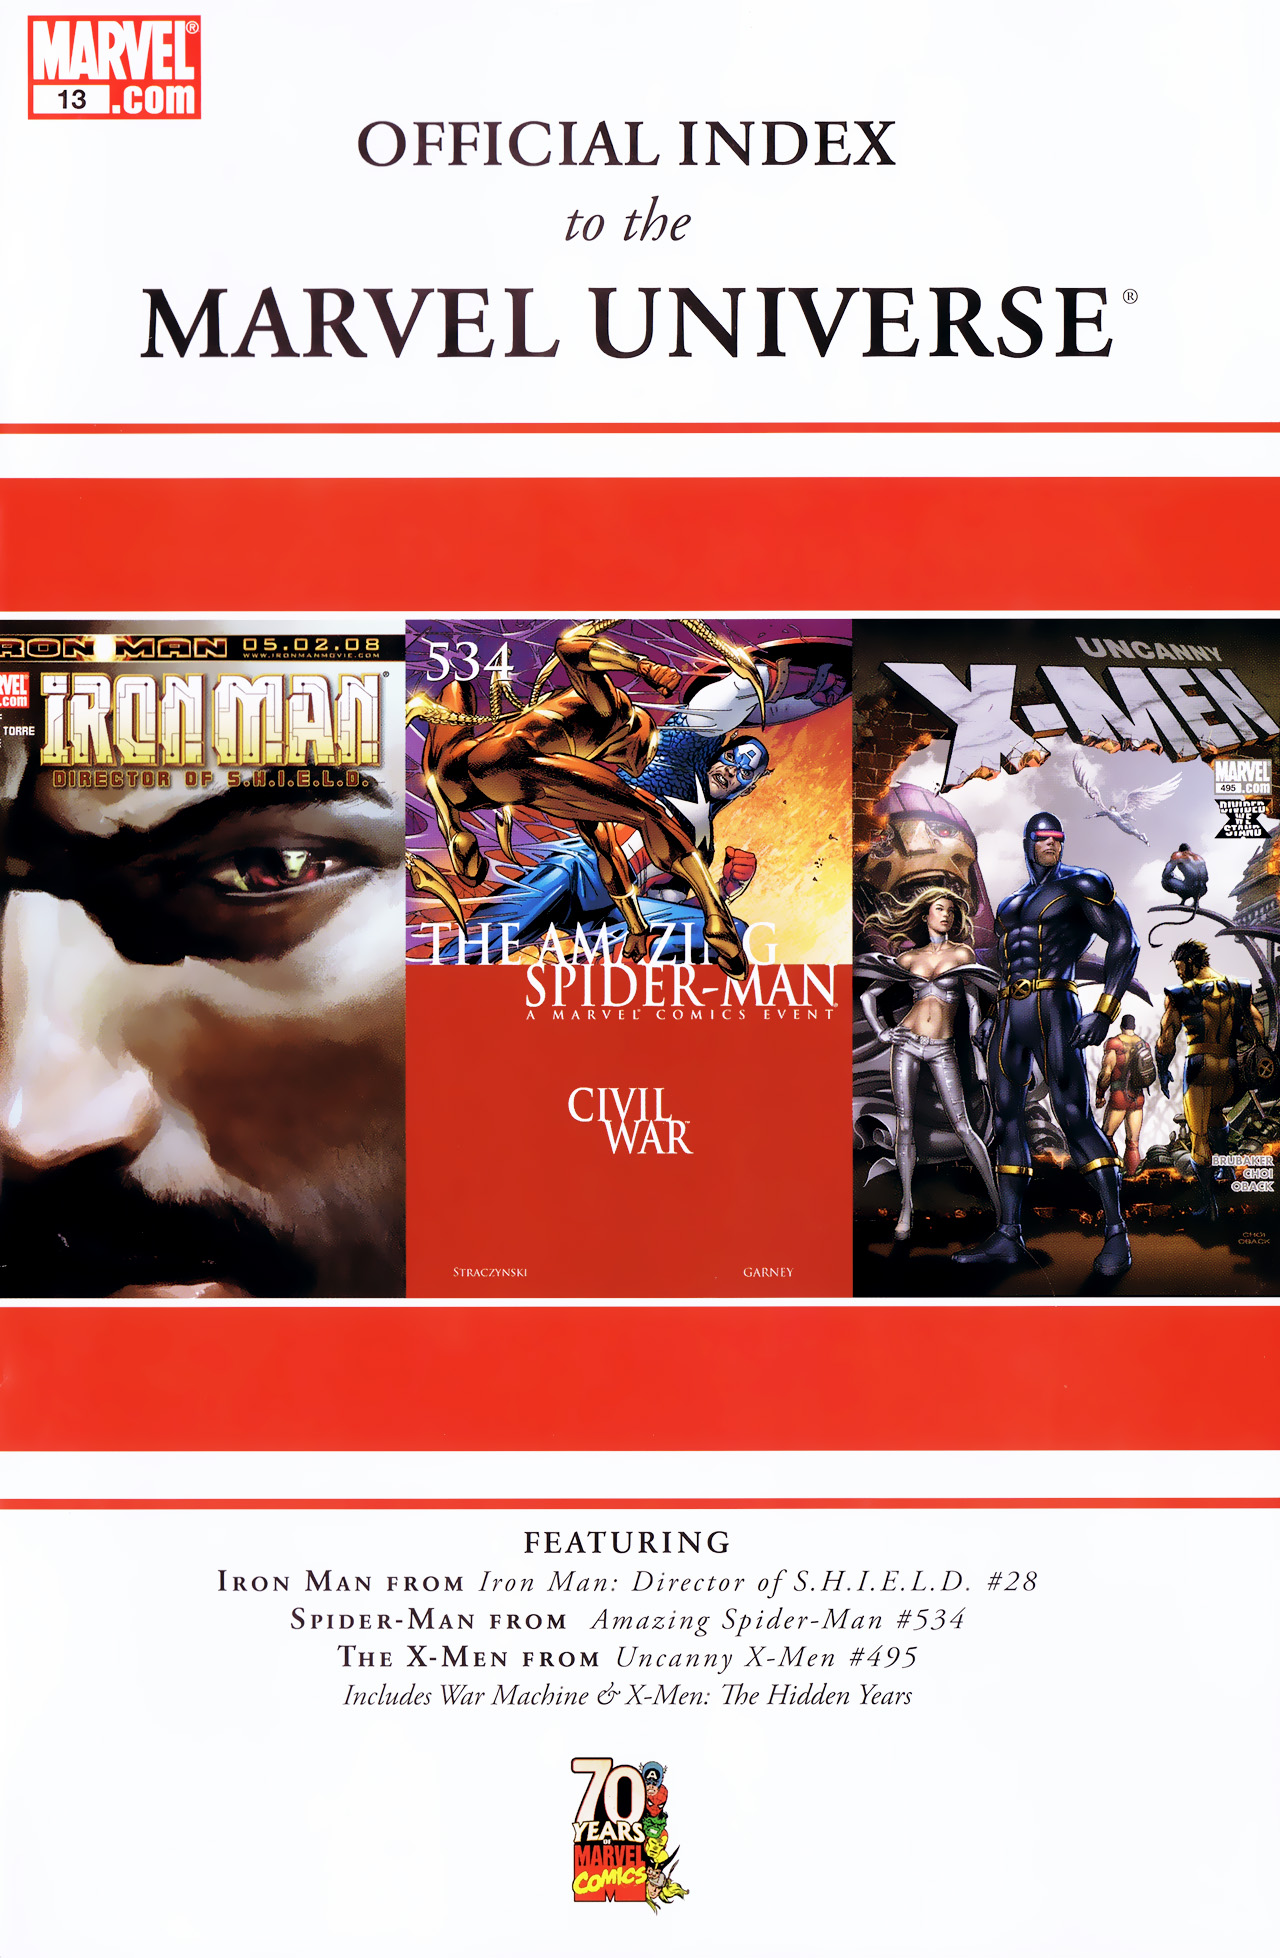 Read online Official Index to the Marvel Universe comic -  Issue #13 - 1